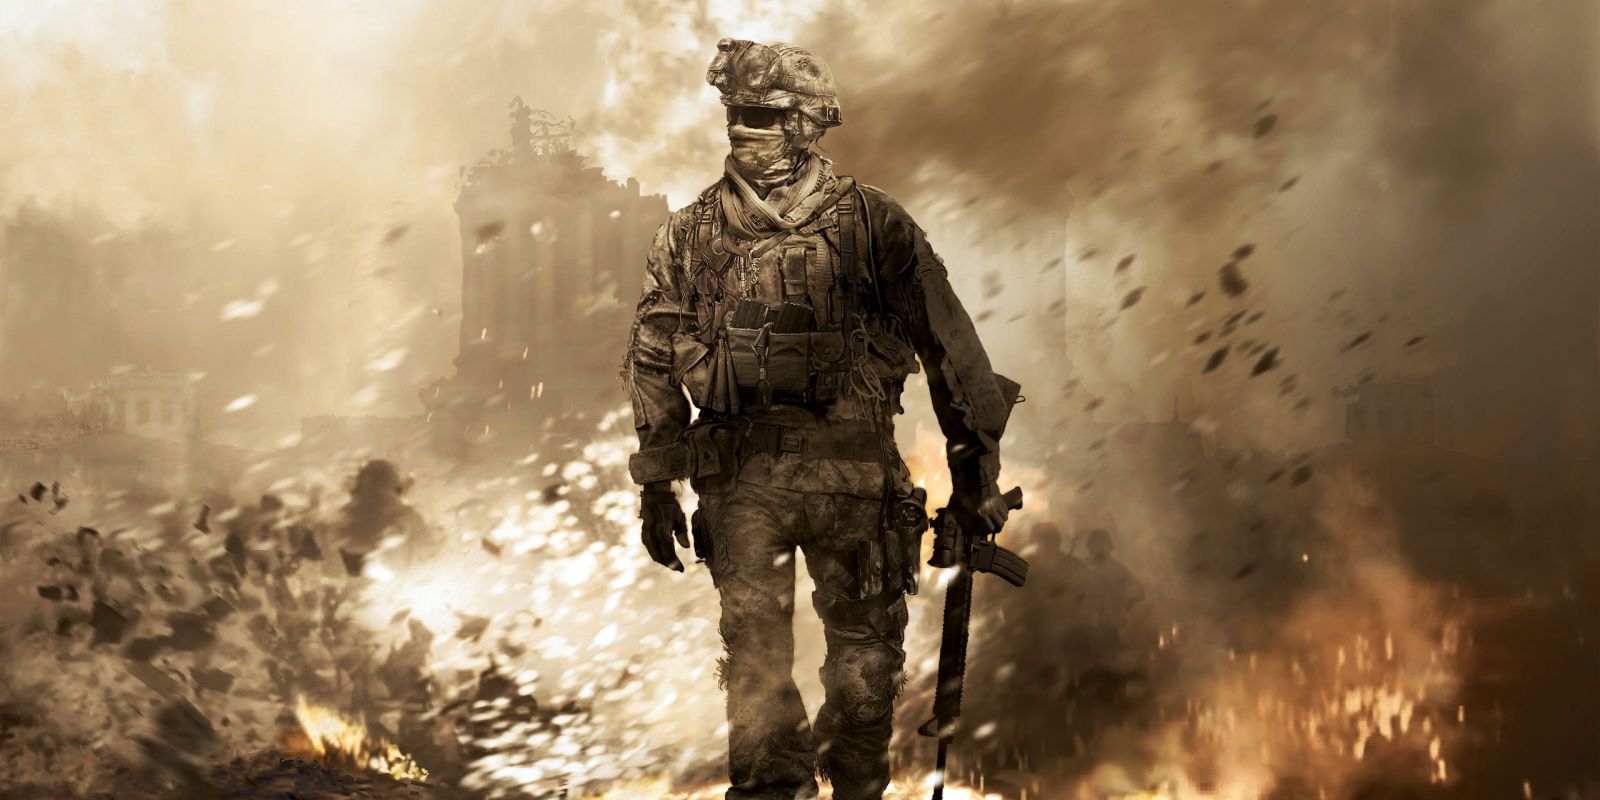 An image of the Call of Duty 4 Modern Warfare 2 posters. On the front is an image of a soldier walking through an explosion